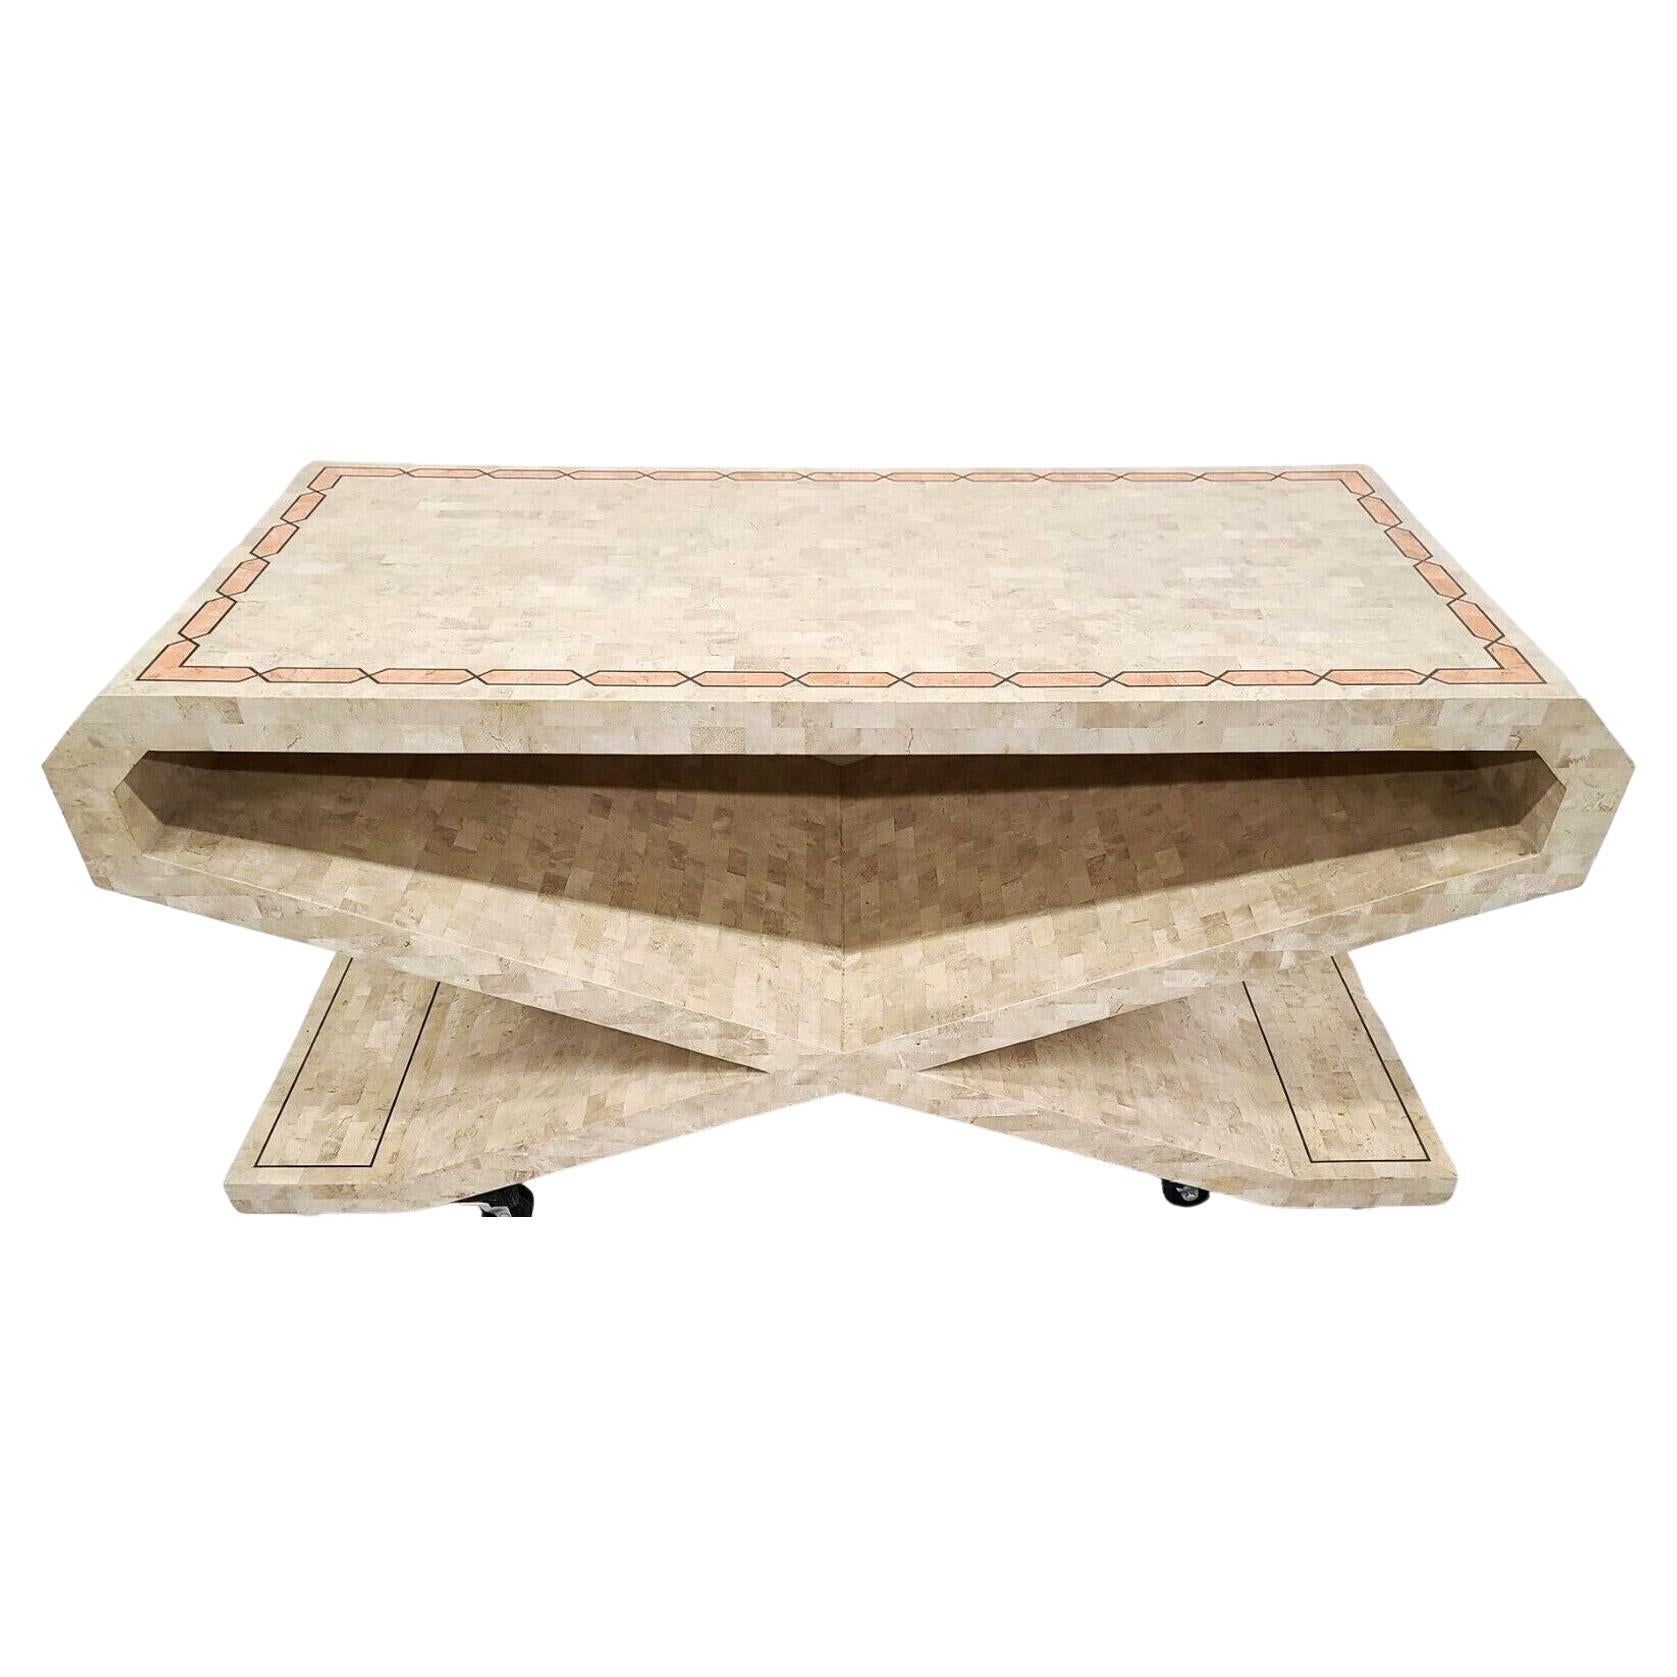 Signed Vintage Tessellated Stone Console or Dining Table Base